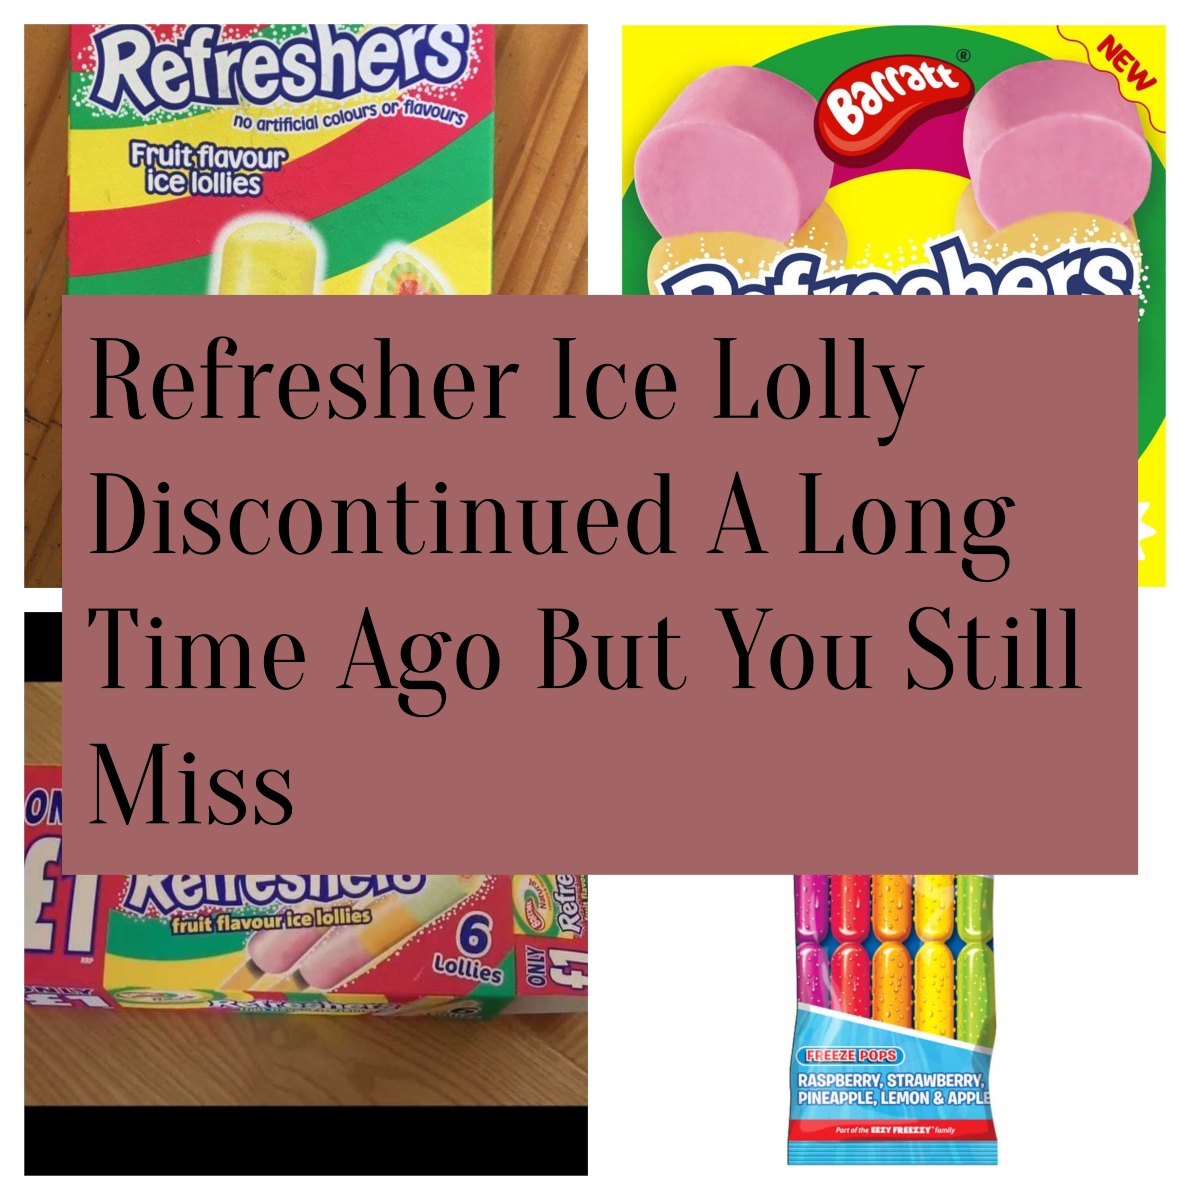 Refresher Ice Lolly Discontinued A Long Time Ago But You Still Miss It